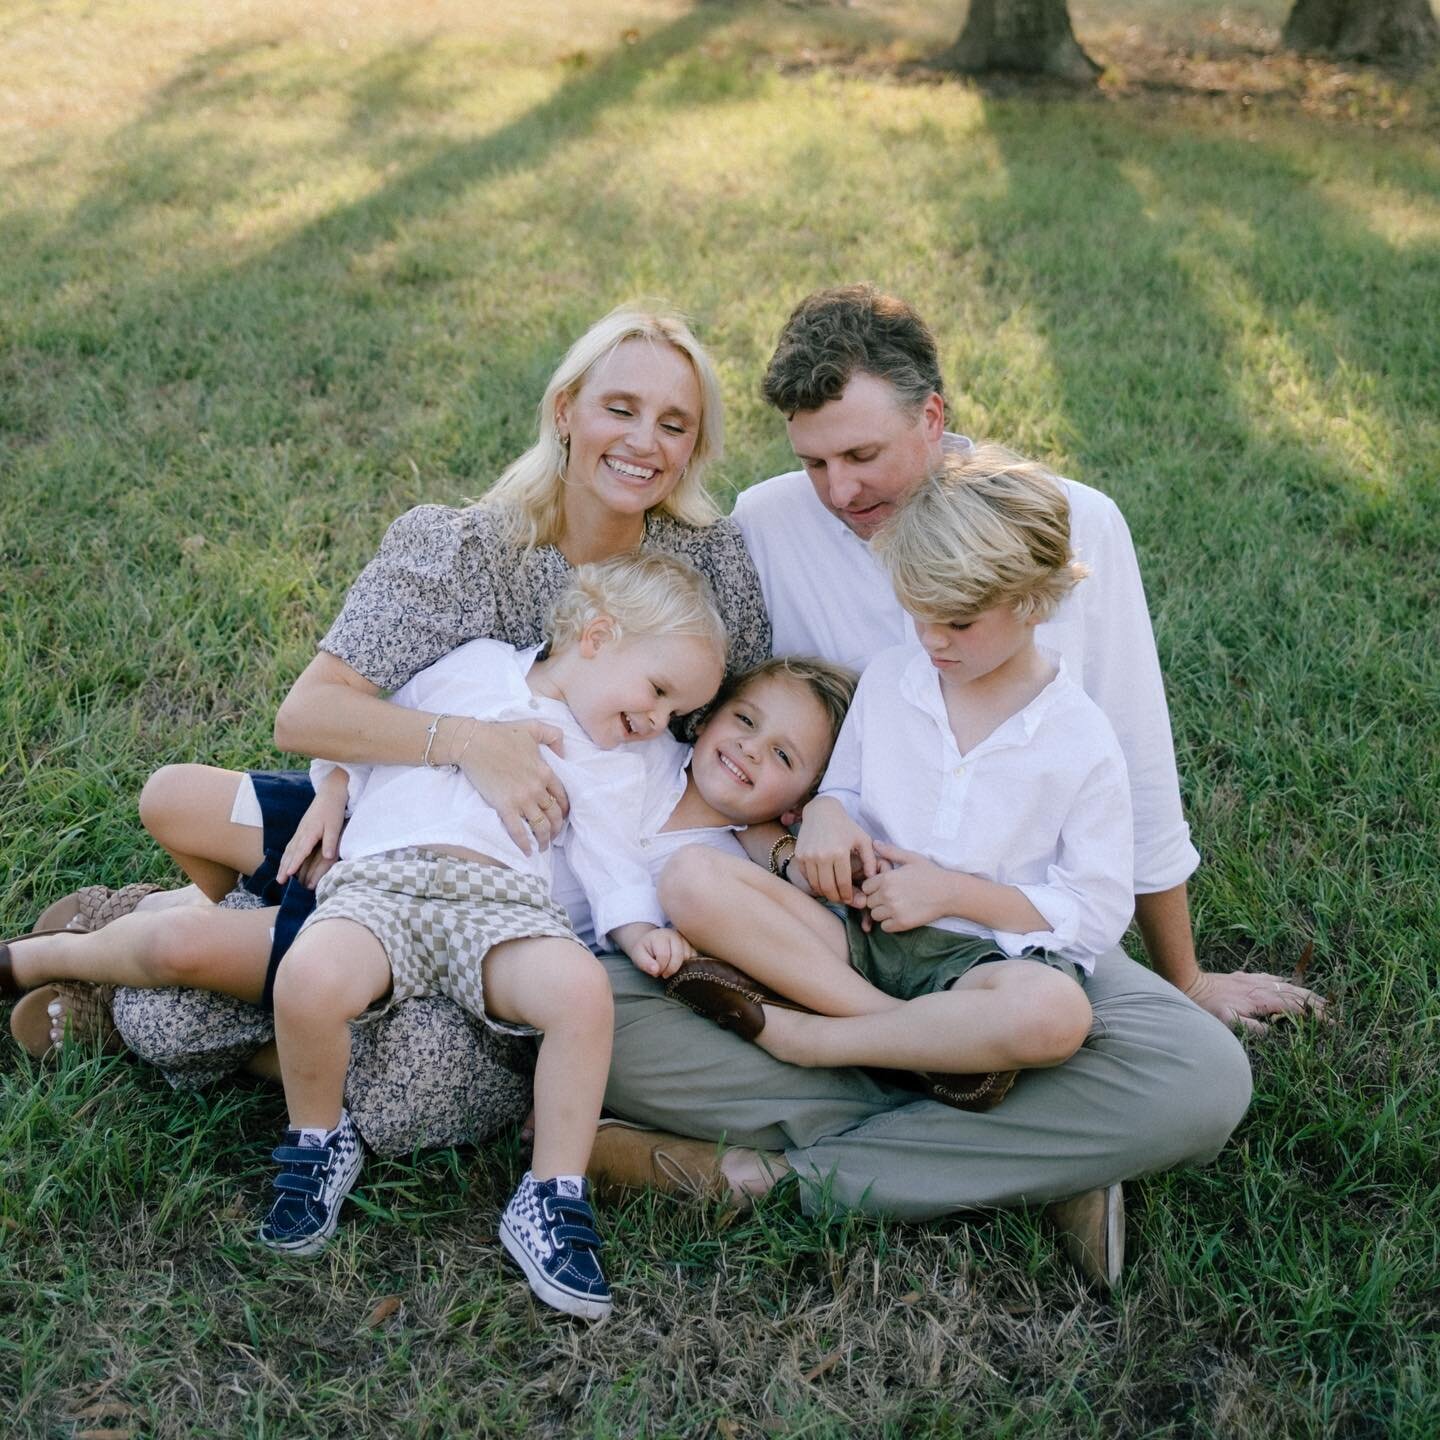 The Burke family was the absolute perfect start to family photo season. 🤍

The Burke boys are always the most fun, and I enjoy capturing them in their essence. From silly faces to getting under moms dress.. I love these memories we created together.